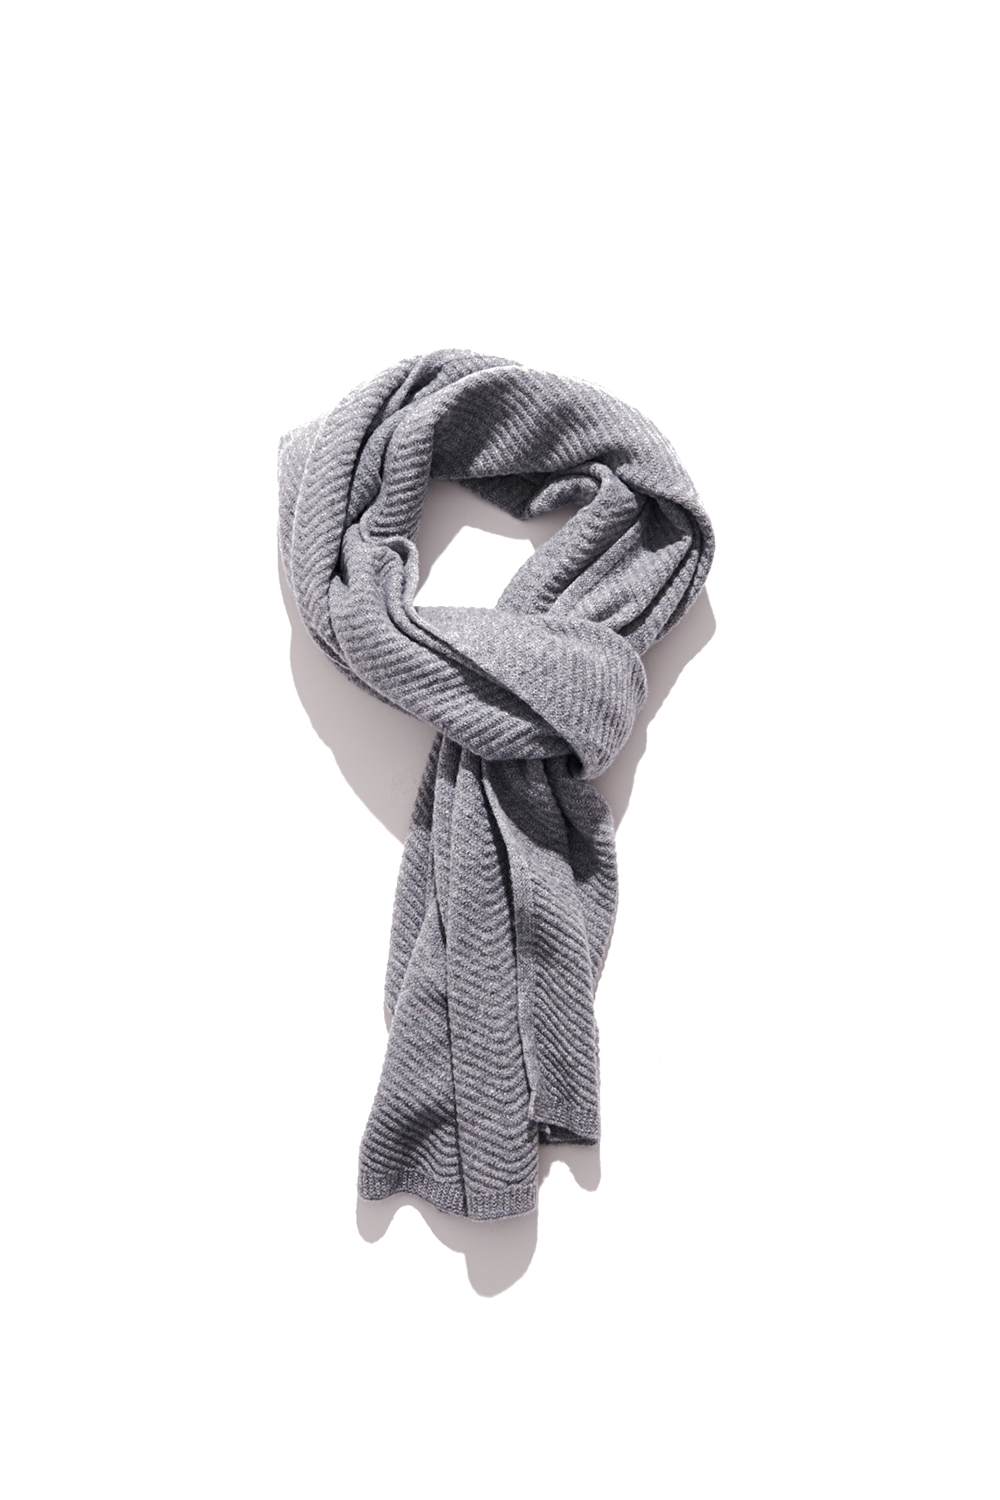 Premium pure cashmere100 whole-garment knitting shawl and scarf - Light gray